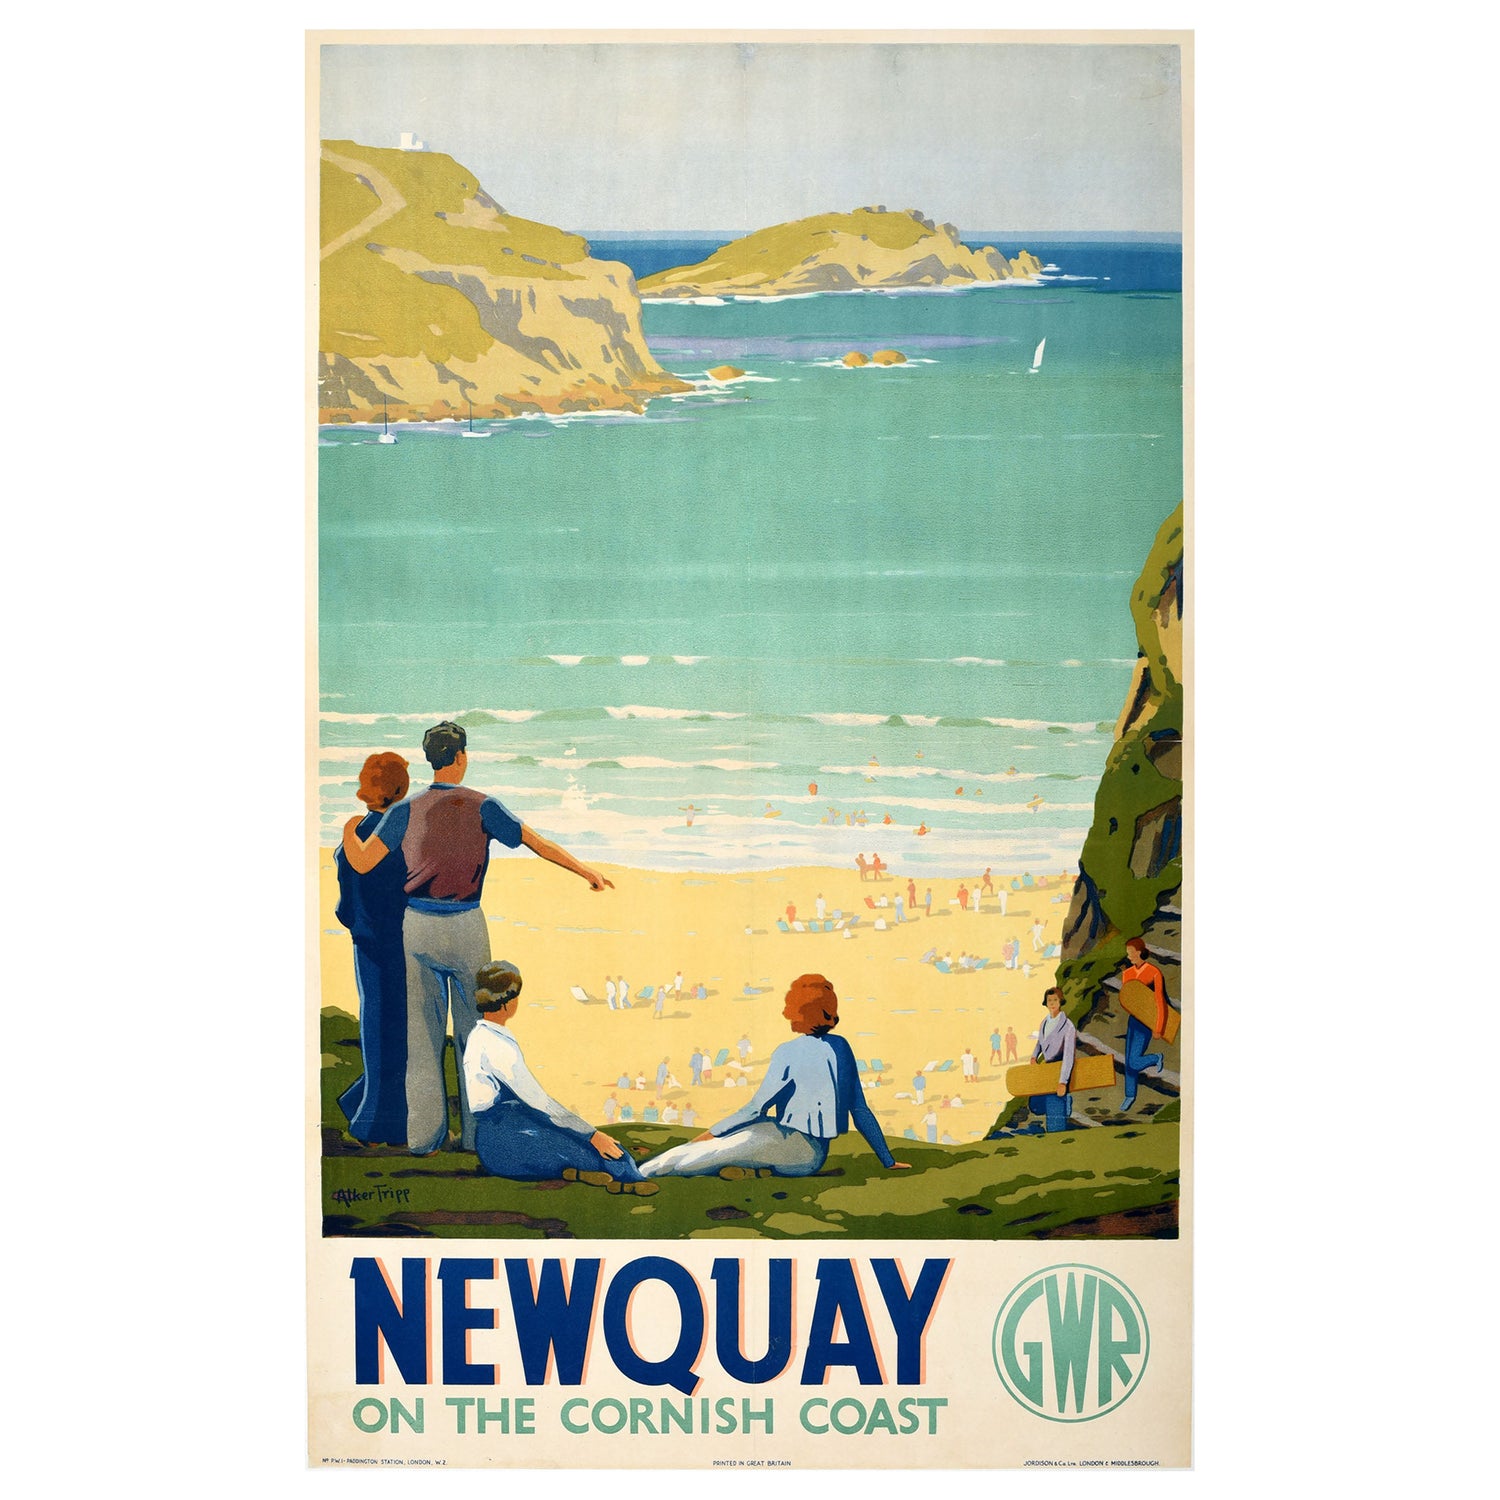 VINTAGE 1936 CORNWALL GWR TRAVEL A4 POSTER PRINT